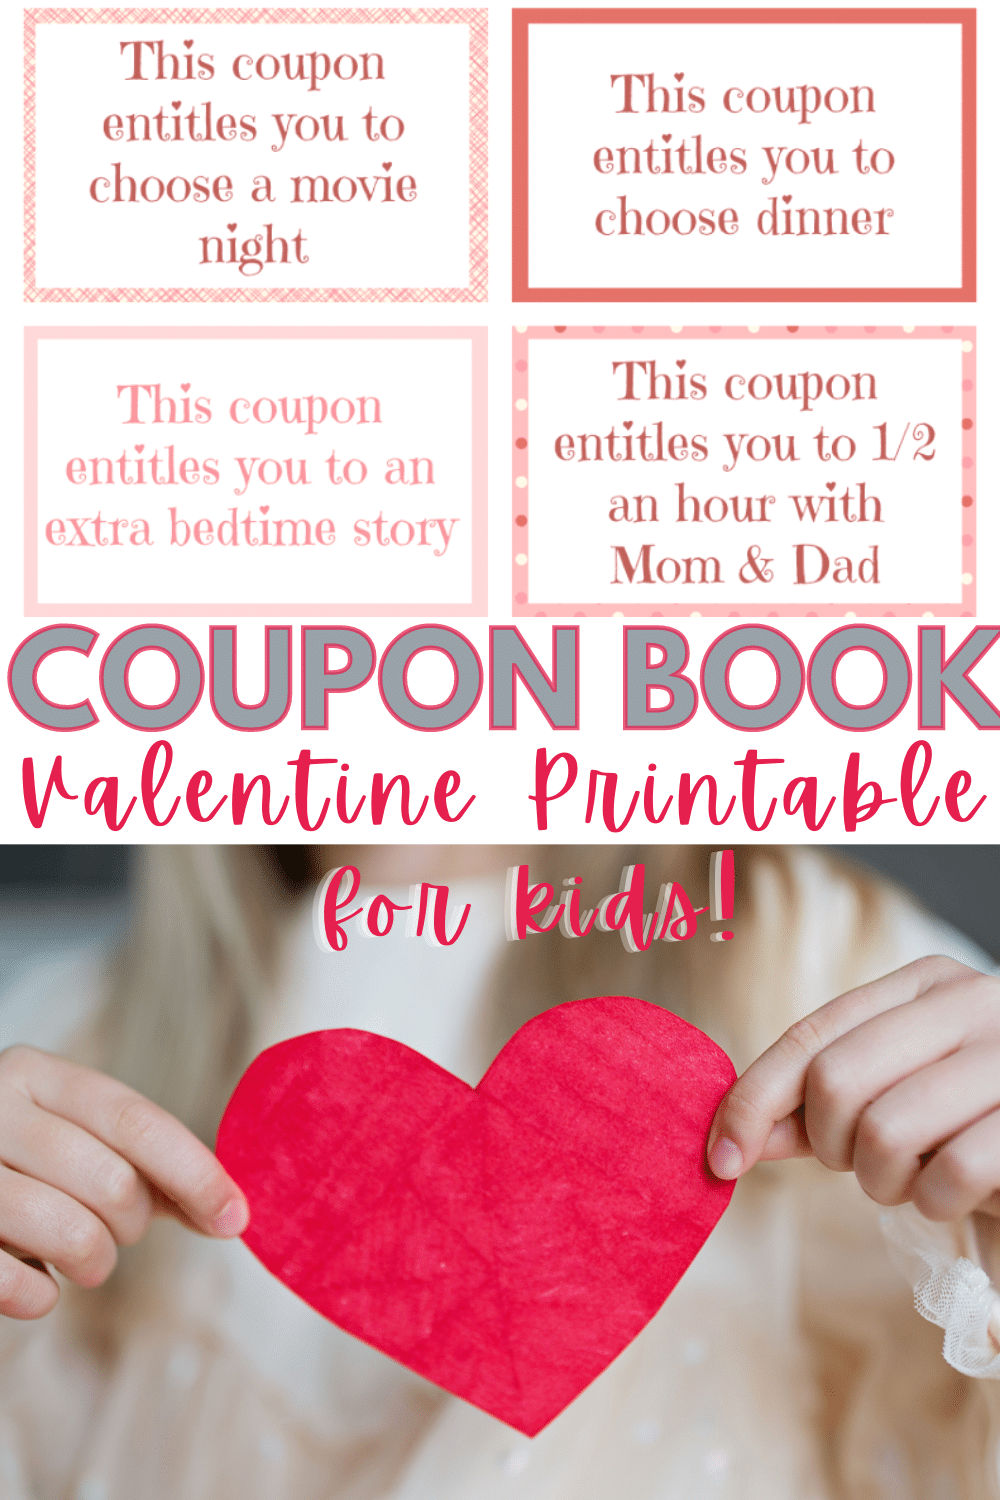 This Printable Valentine Coupon Book for Kids is a fun and easy way to show your love for children. Even better, it won't cause cavities! #valentinesday #forkids #printable #couponbook via @wondermomwannab